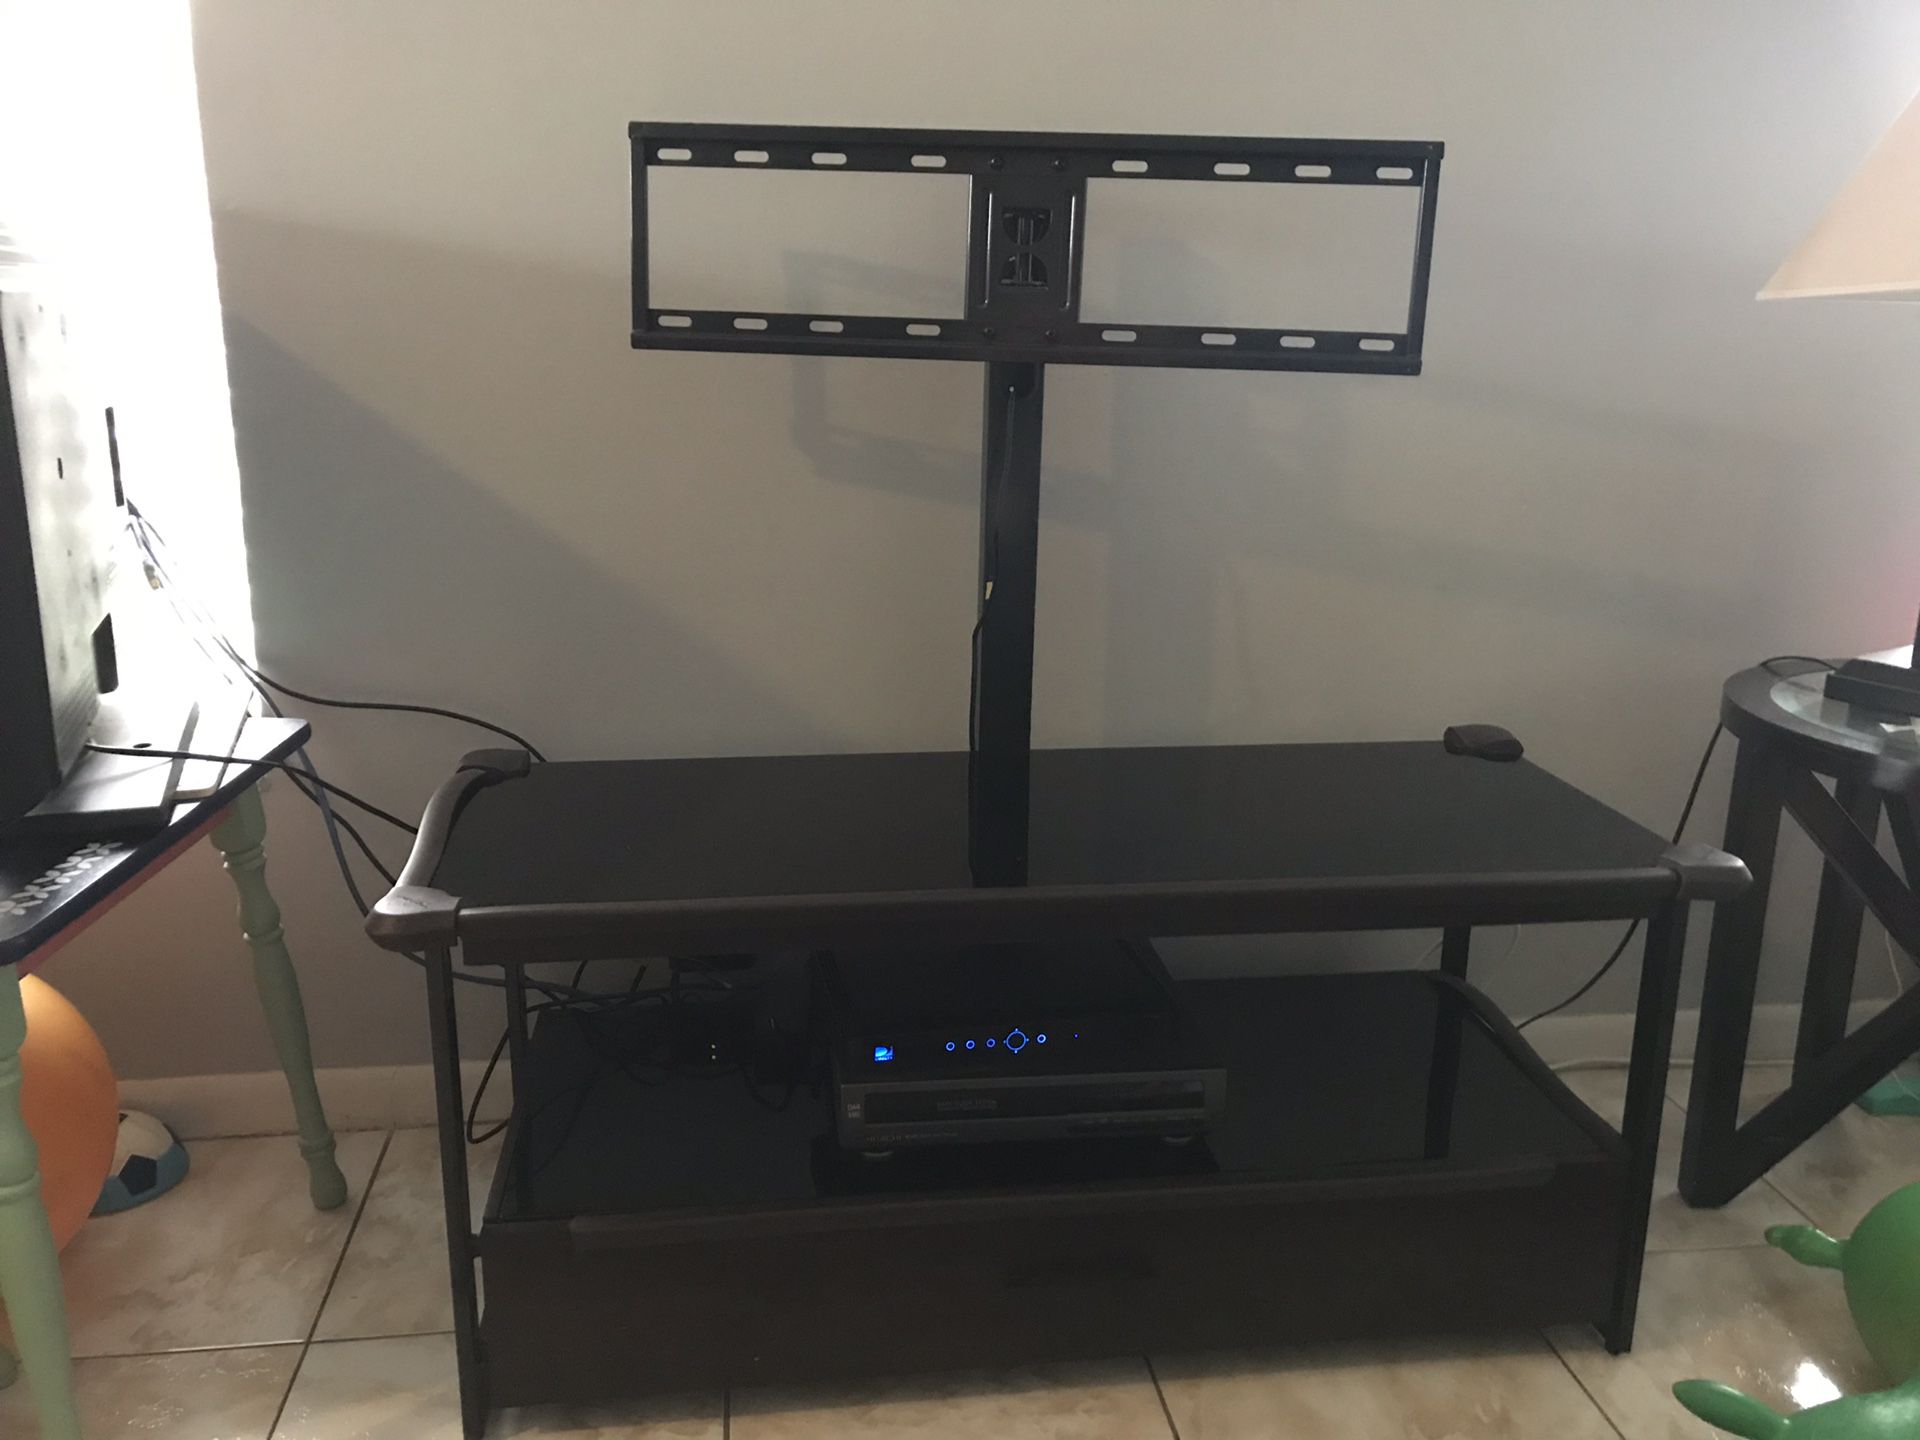 New Tv stand with drawer, can hold up to 65” tv. It has the rubber safety pads on the edges and corners since we have kids but they come off no probl